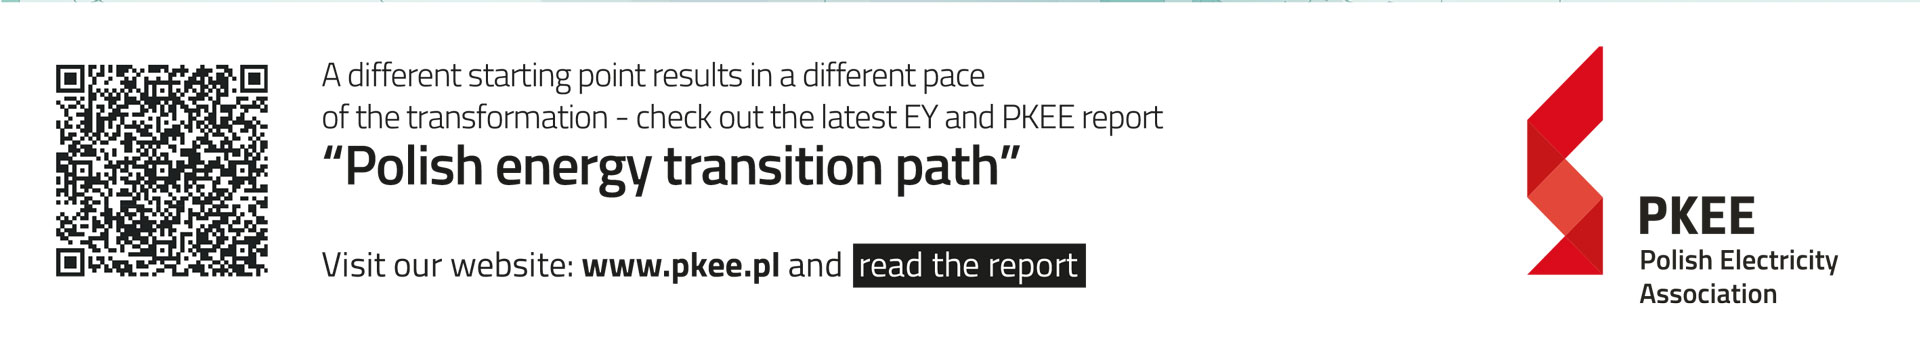 PKEE LOGO and QR CODE 